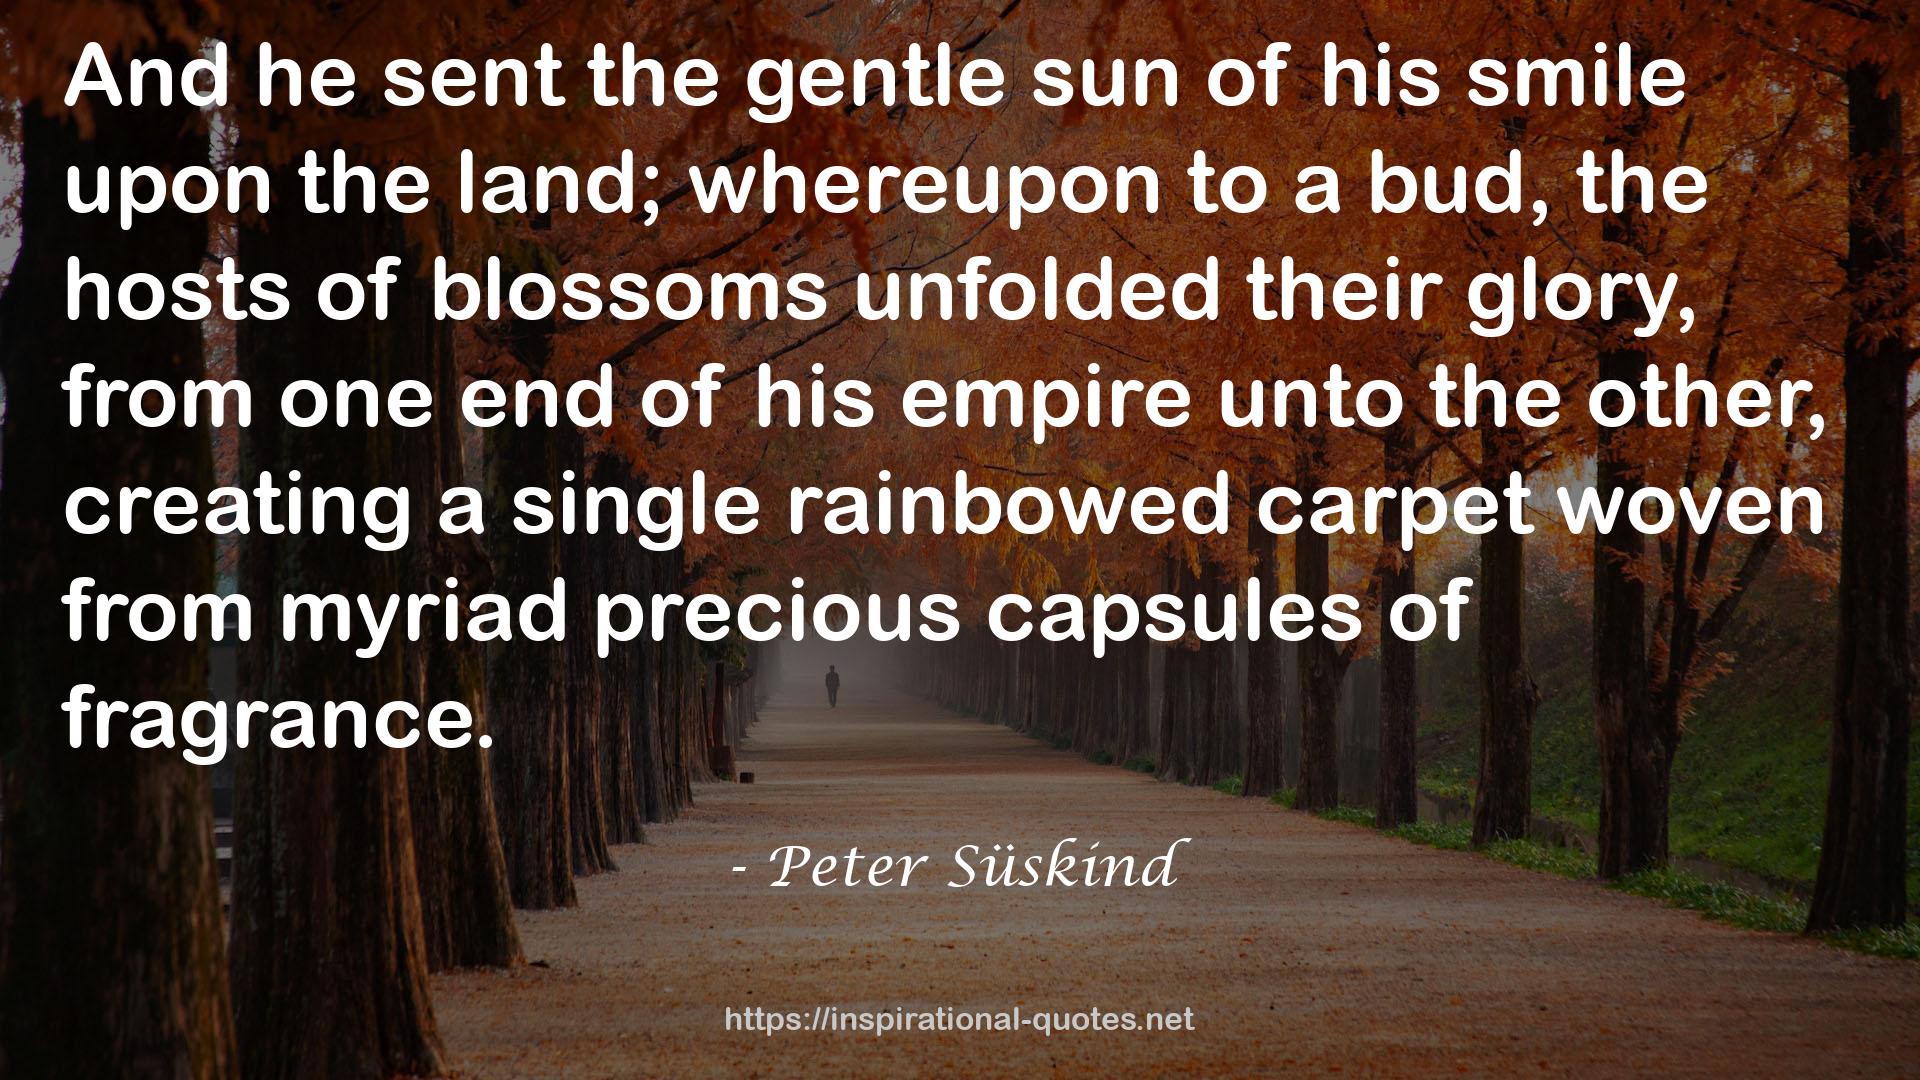 Peter Süskind QUOTES